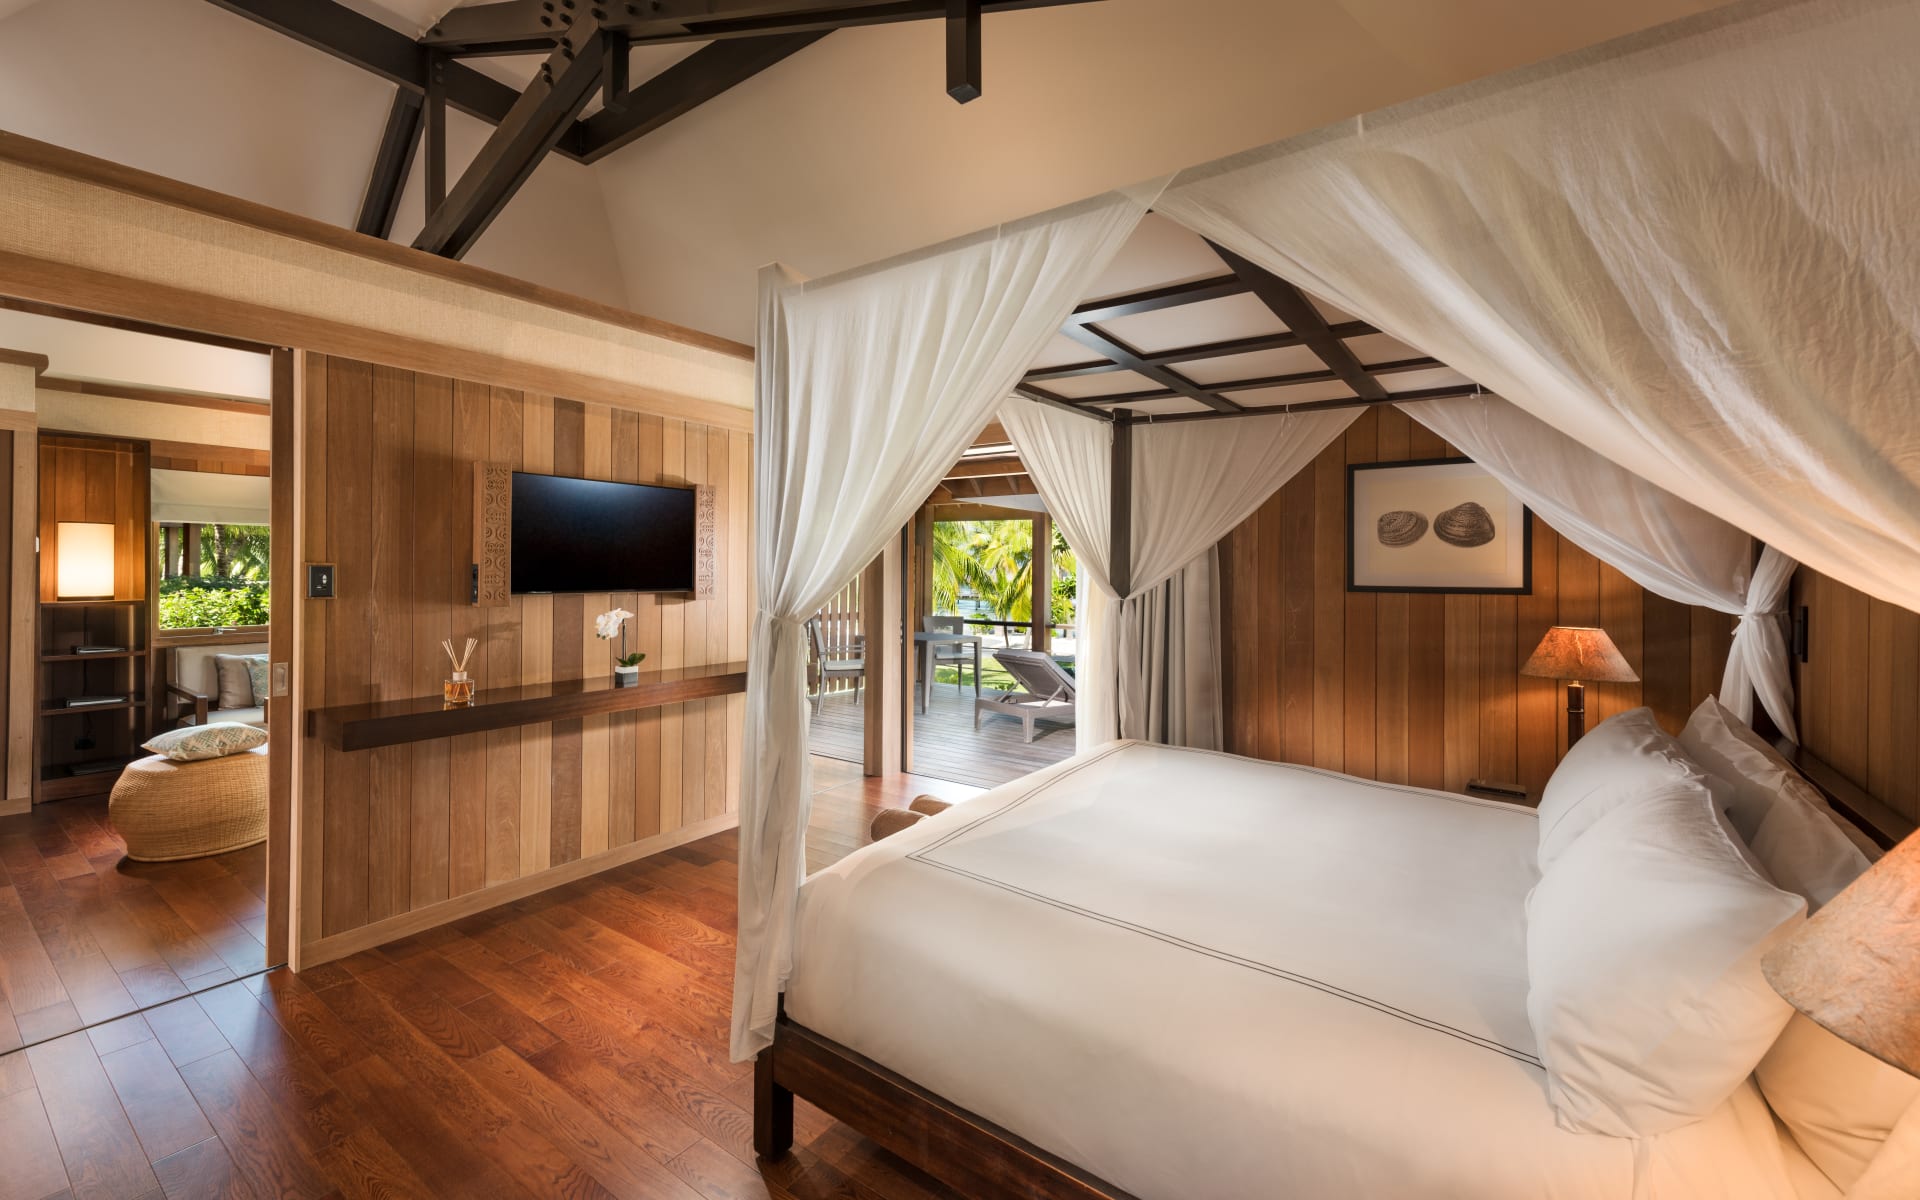 There is a white canopy bed in the middle of a wooden-designed room. 